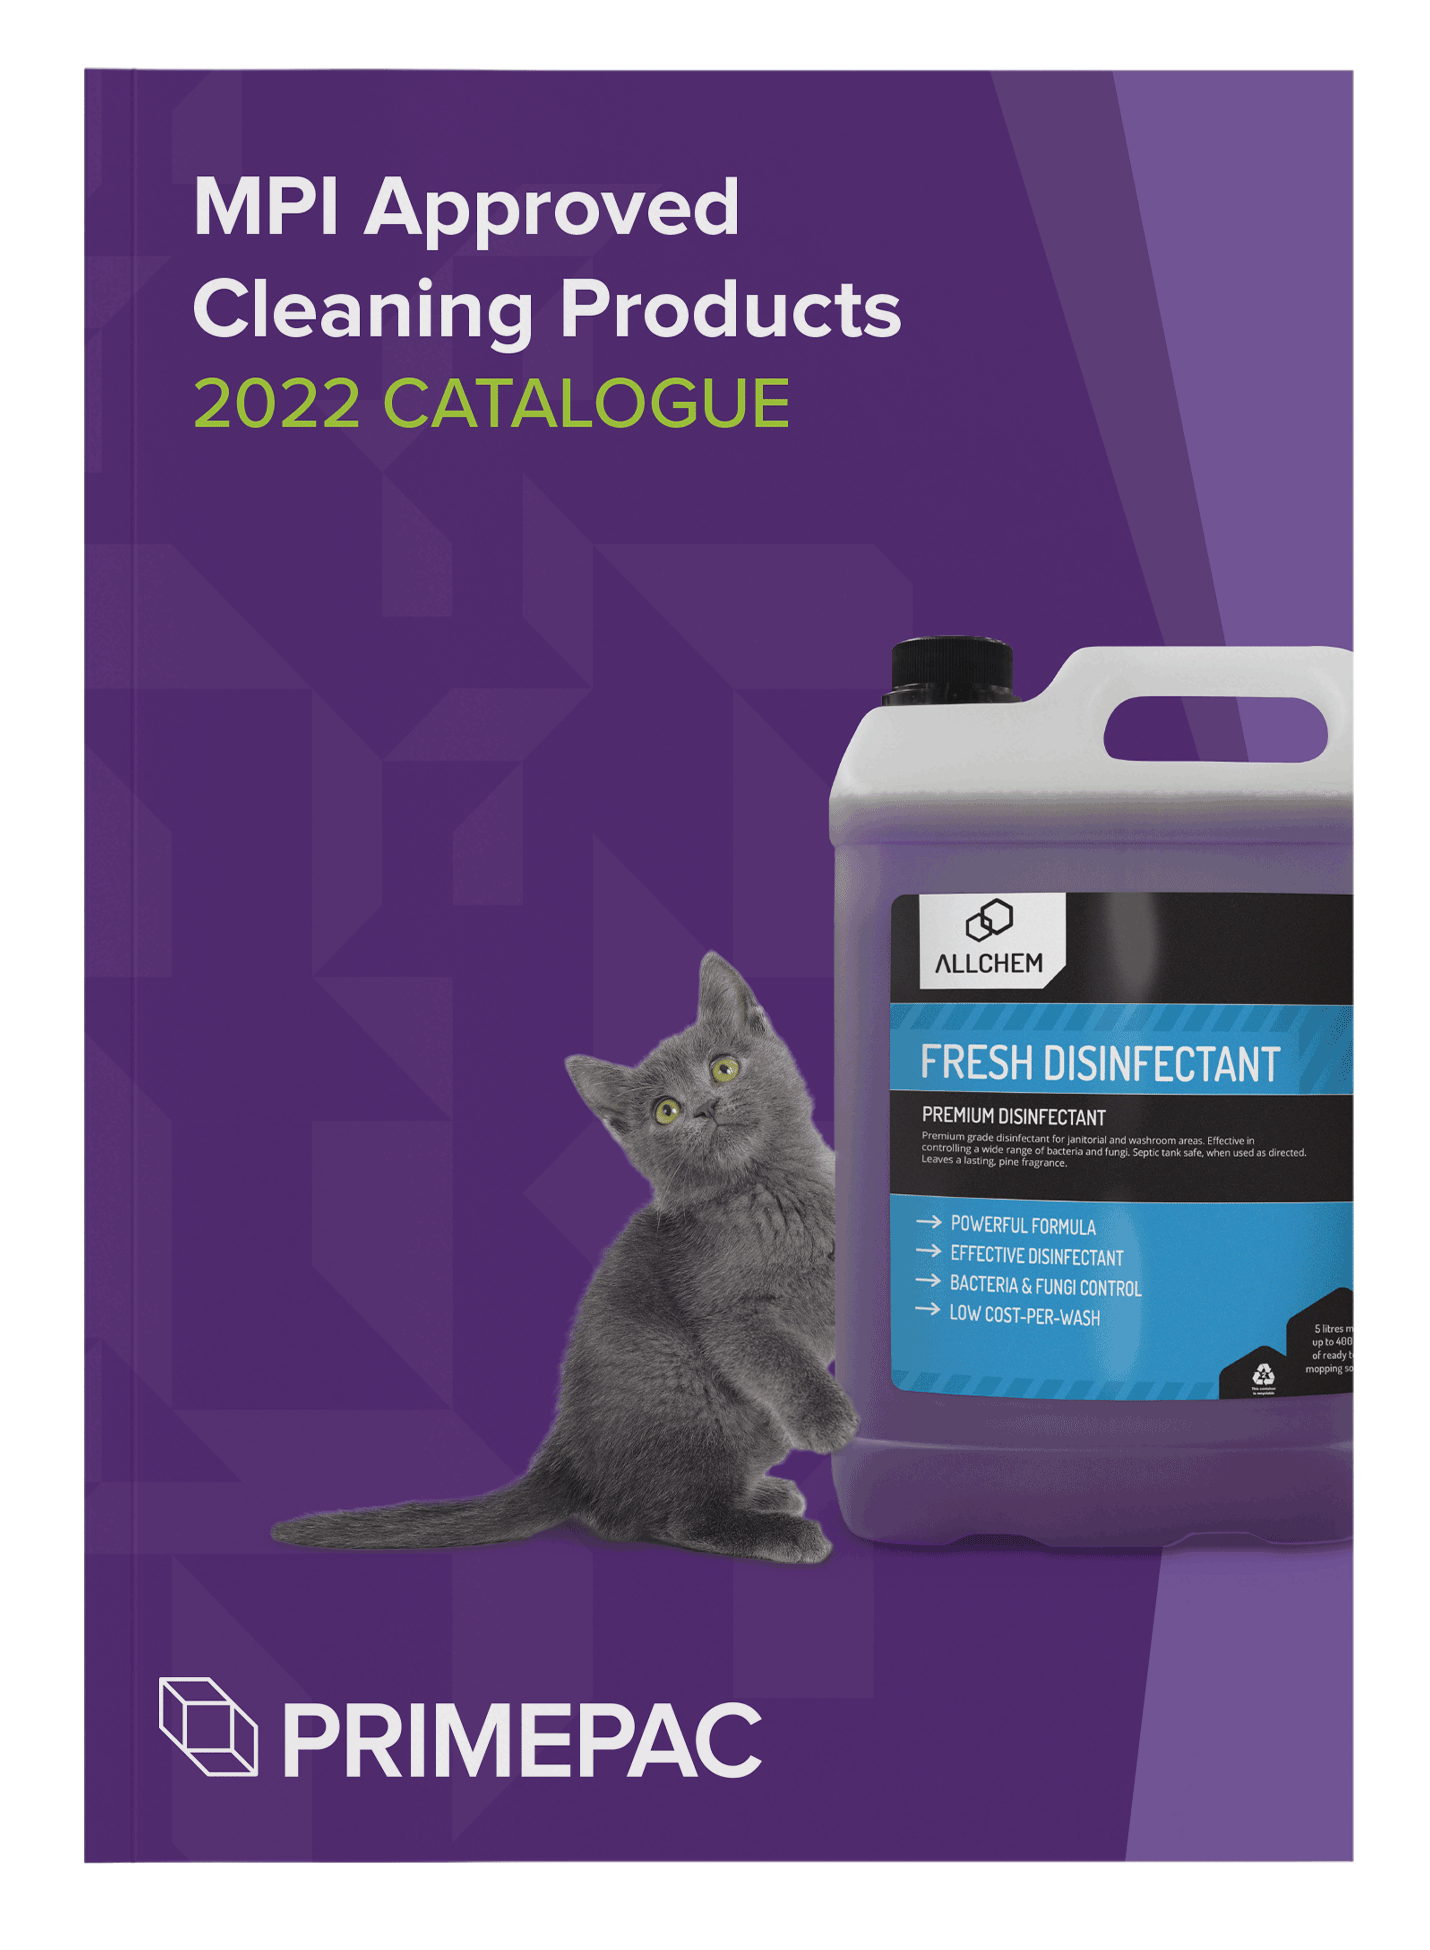 MPI approved cleaning products catalogue